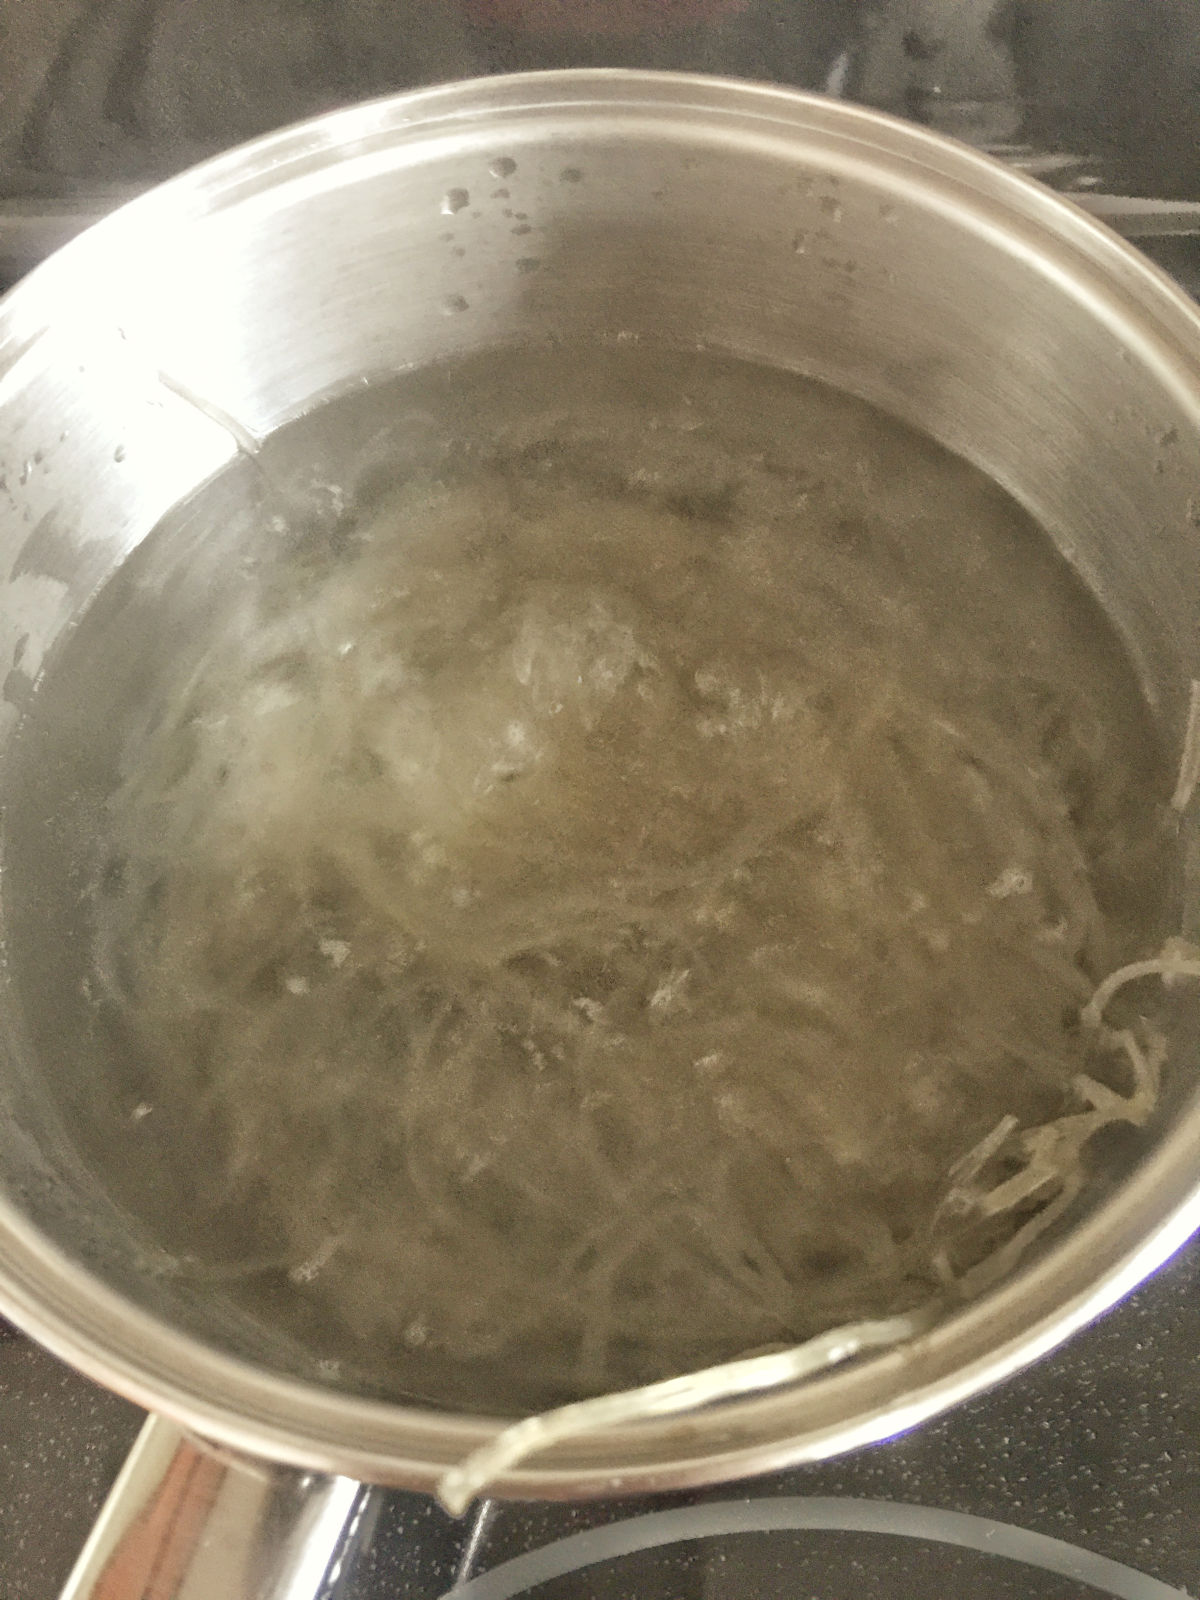 Sweet potato glass noodles in boiling water in a stainless steel pot on stove.